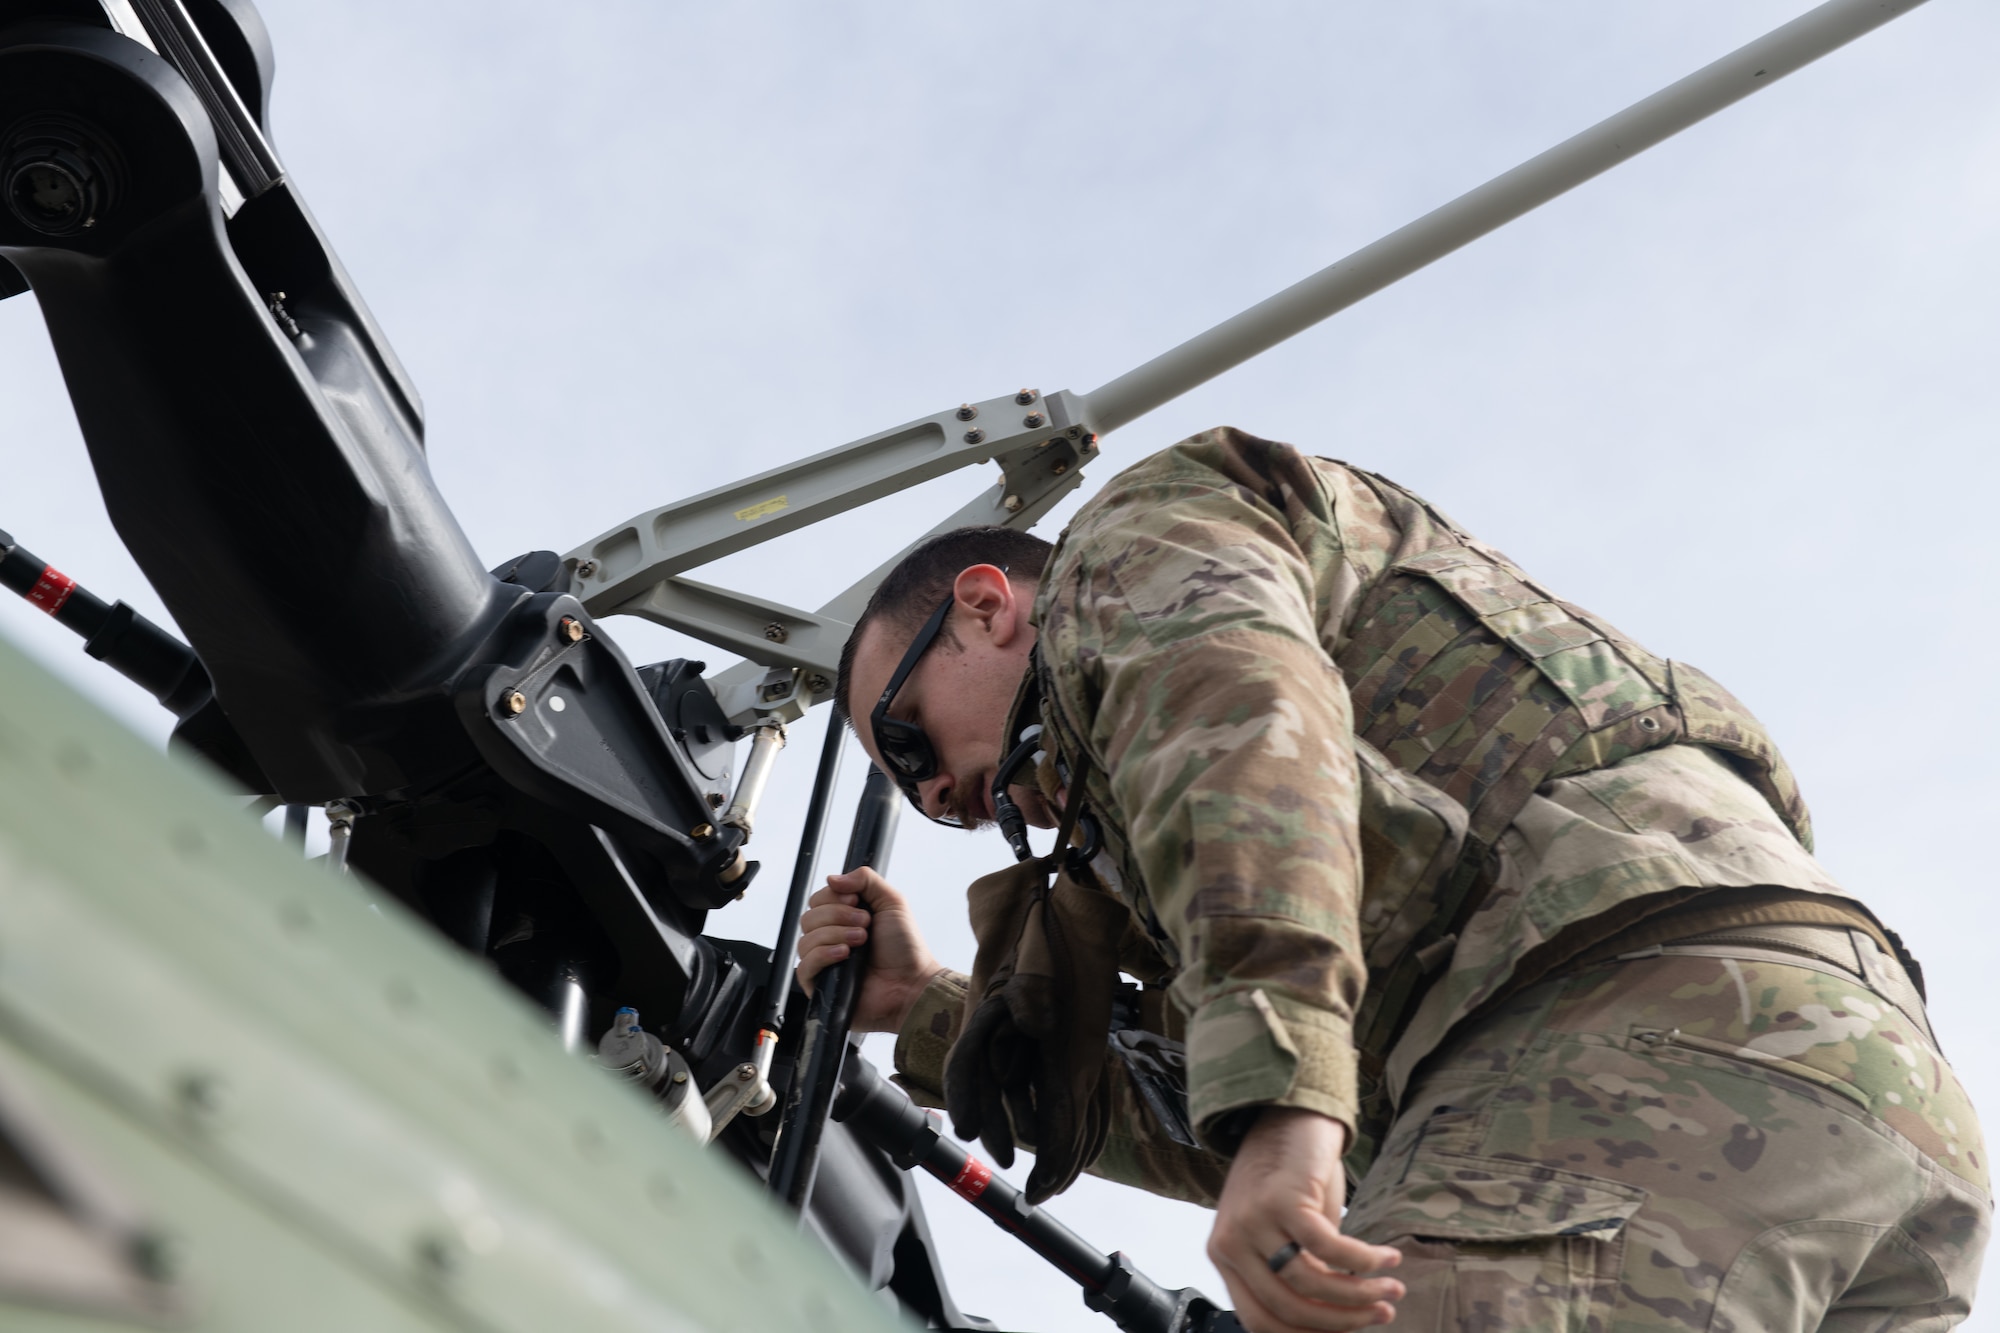 Tech. Sgt. John Griggs, 37th Helicopter Squadron flight engineer, completes a pre-flight check on his helicopter, February 15, 2022 on F.E. Warren Air Force Base, Wyoming. The purpose of a pre-flight check is to make sure the UH-1N Huey is in correct working order prior to take off. (U.S. Air Force photo by Airman Sarah Post)